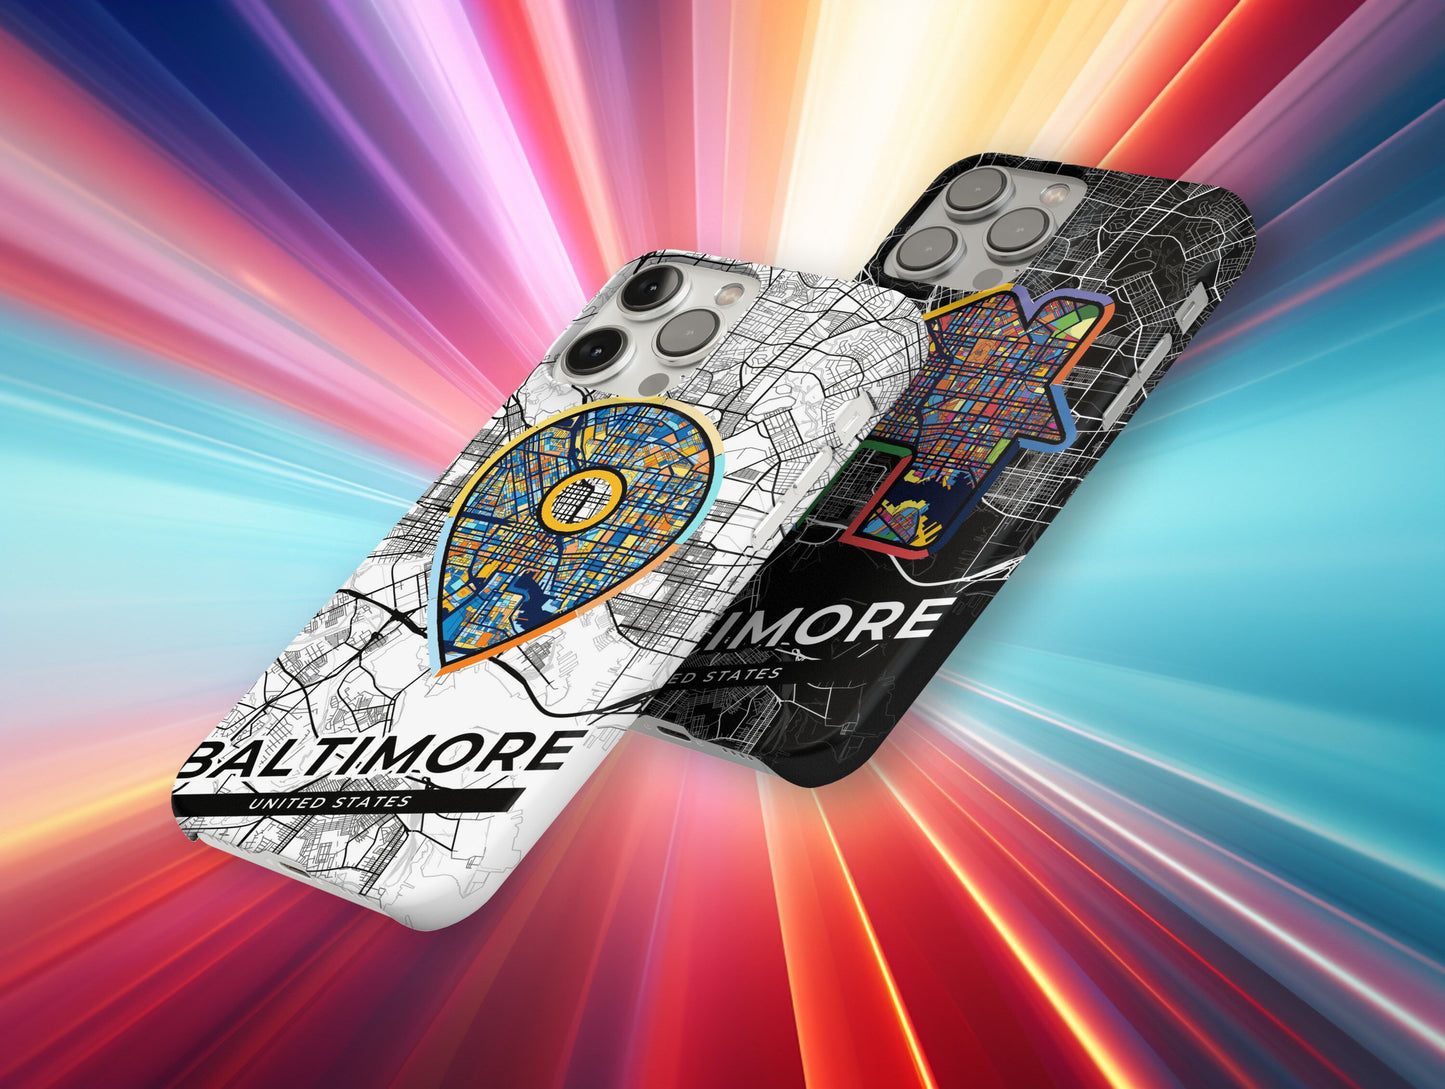 Baltimore Maryland slim phone case with colorful icon. Birthday, wedding or housewarming gift. Couple match cases.